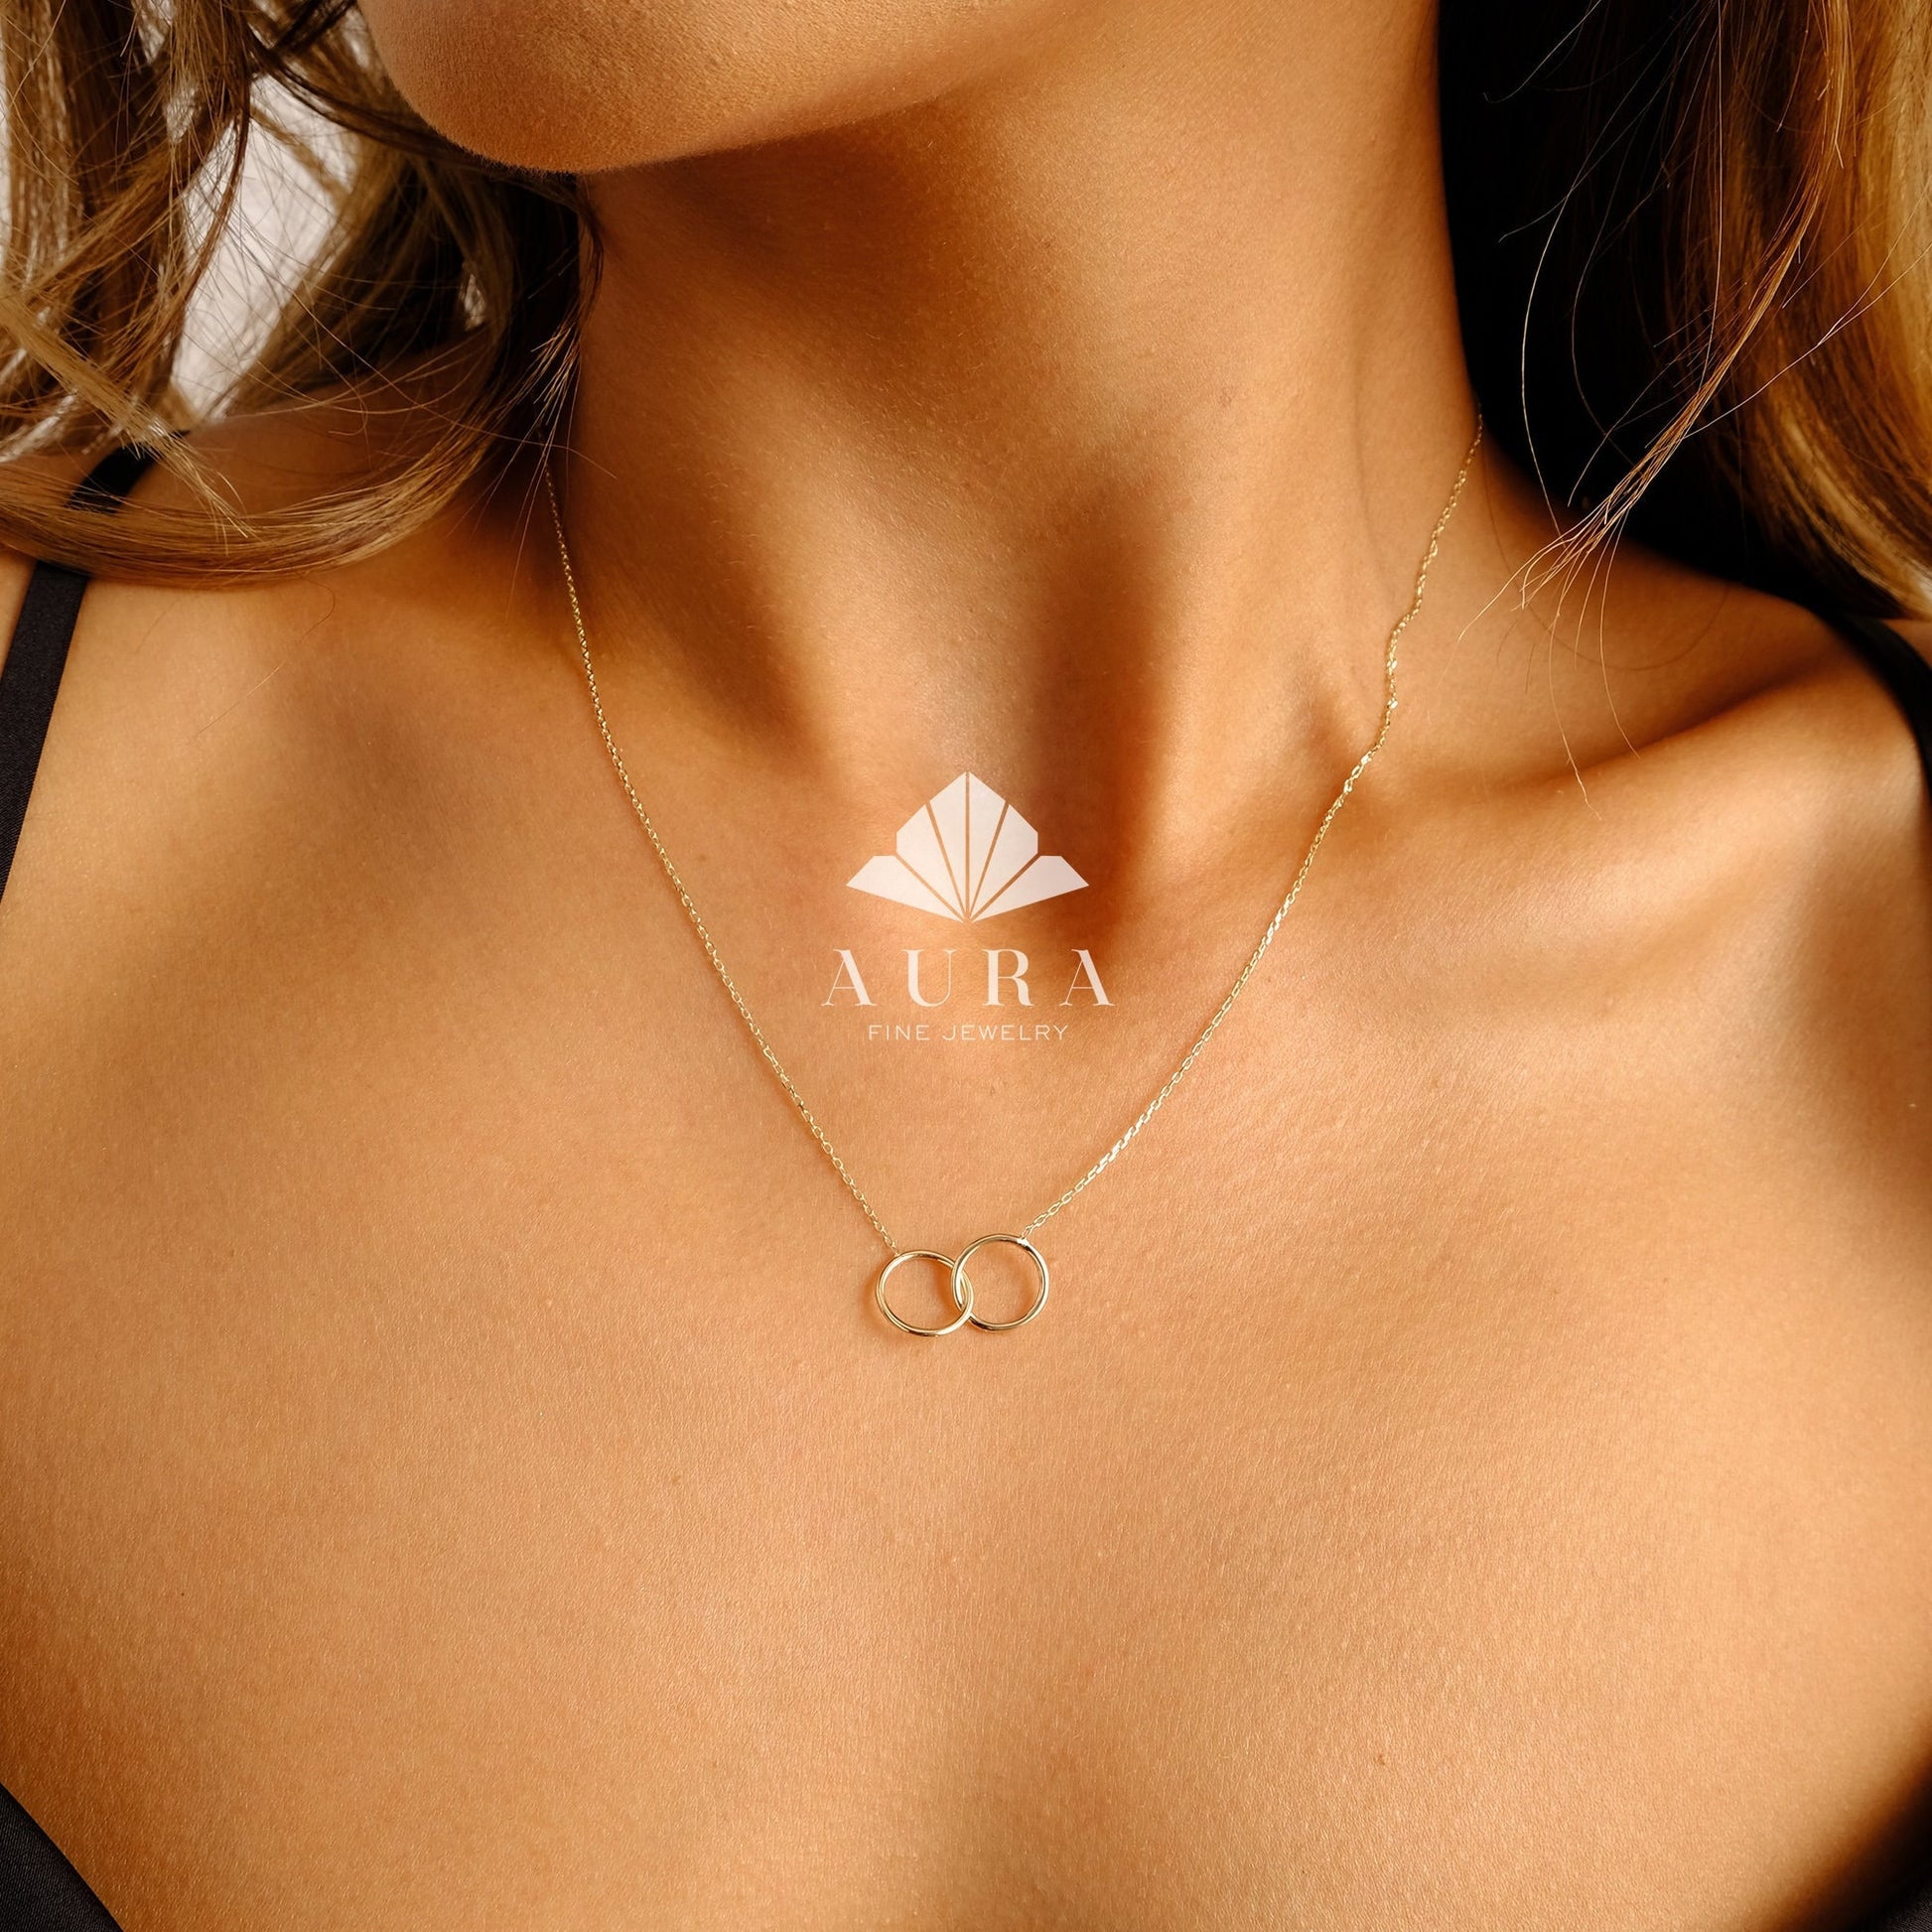 Layered Initial Necklaces for Women, 14K Gold Plated Bar Necklace Dainty Layering Hexagon Letter Pendant Necklace Infinity Circles Necklace Gold